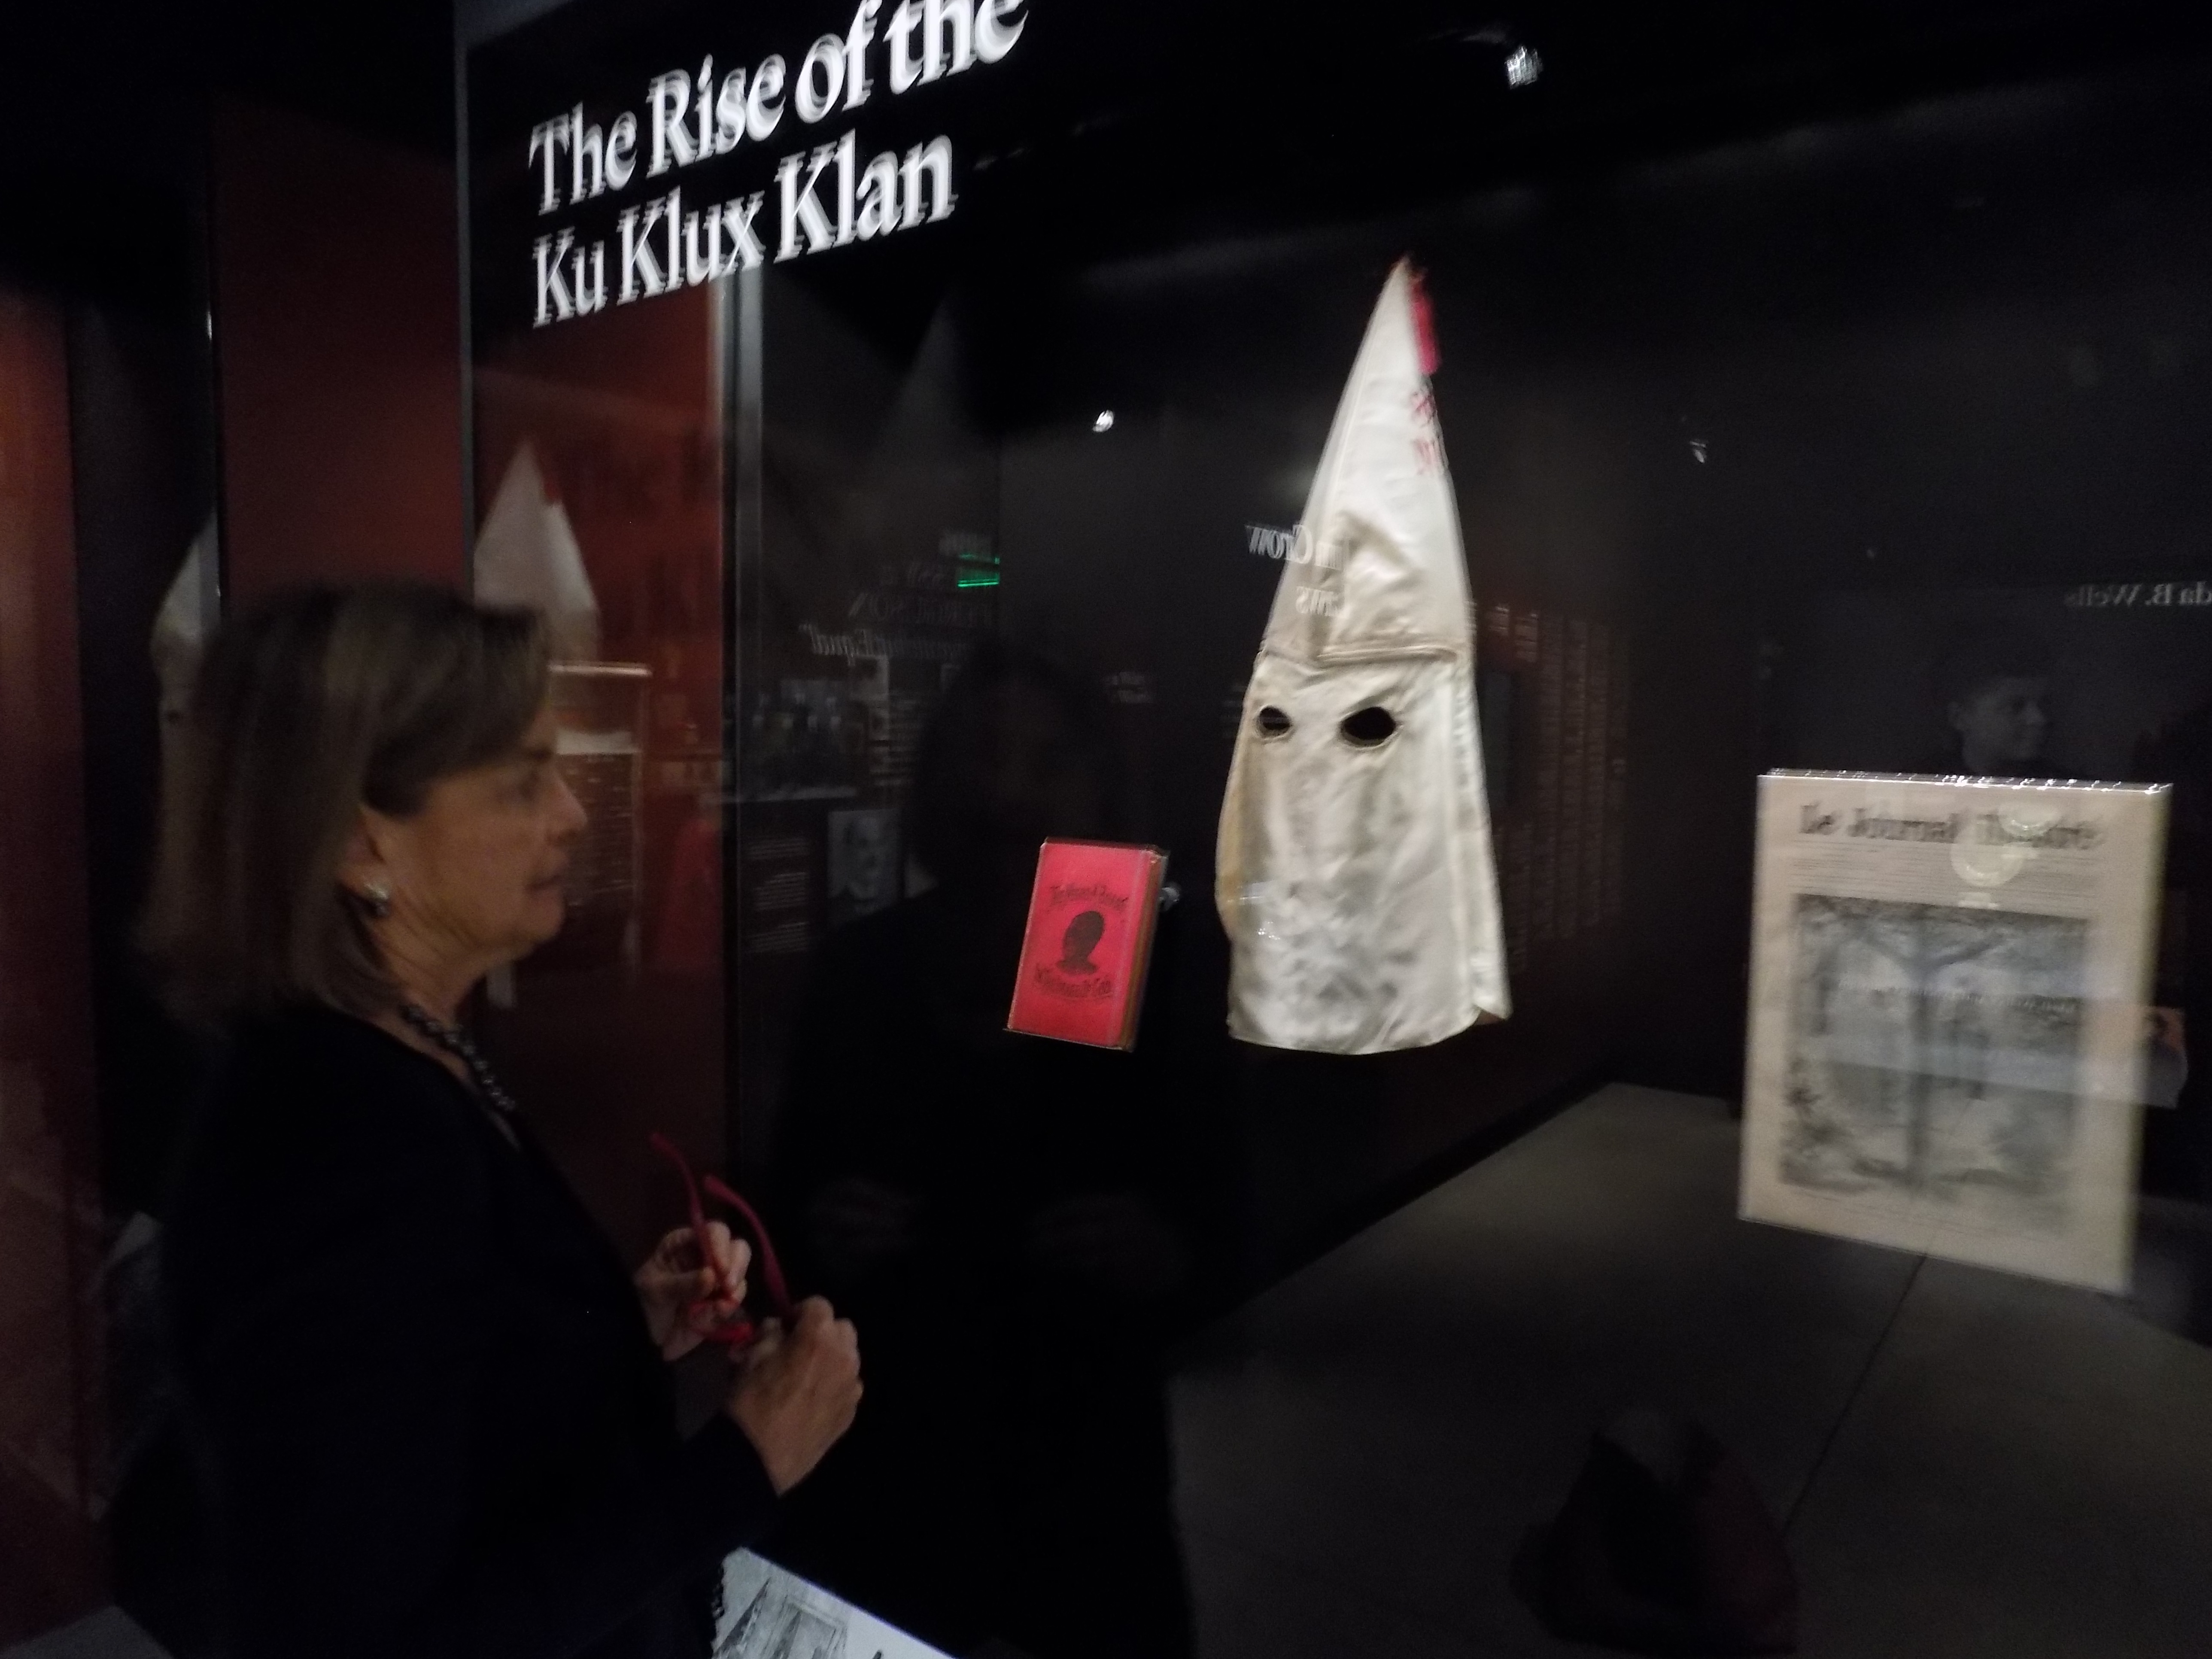 THE TERRIFYING KU KLUX KLAN ORIGINATED IN THE SOUTH IN 1865  IT IS STILL AN ACTIVE ORGANIZATION TODAY AND HAS INSERTED ITSELF INTO THE PRESIDENTIAL ELECTION. DAVID DUKE OF LOUISIANA, A FORMER IMPERIAL WIZARD OF THE KKK, IS CURRENTLY RUNNING FOR THE US SENATE. 